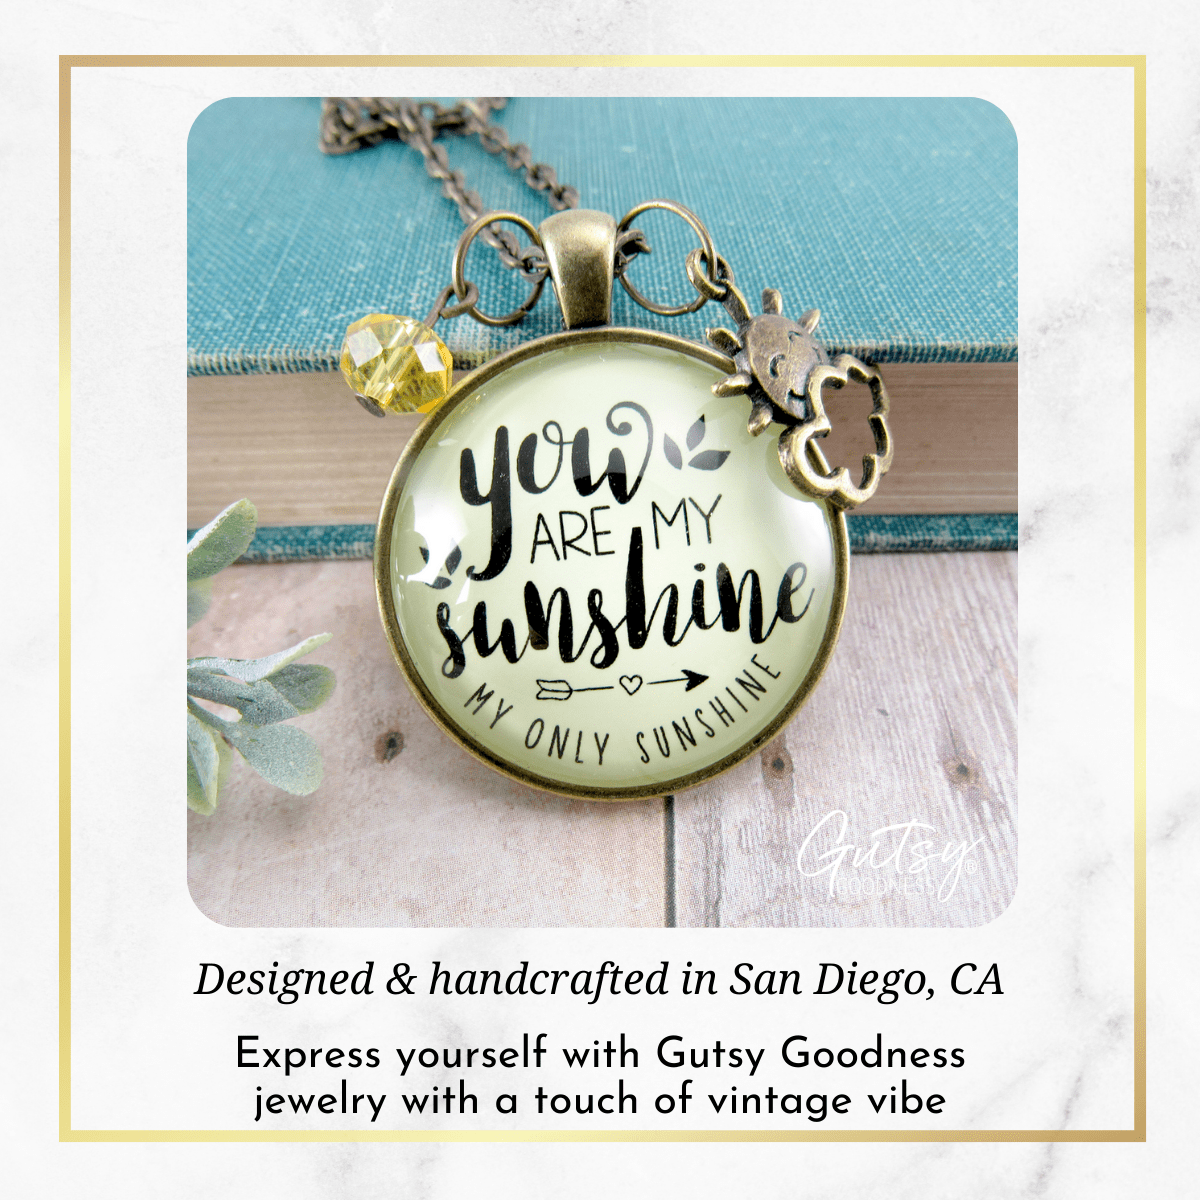 Gutsy Goodness You are My Sunshine Necklace Friendship Jewelry Inspired Sun Charm - Gutsy Goodness Handmade Jewelry;You Are My Sunshine Necklace Friendship Jewelry Inspired Sun Charm - Gutsy Goodness Handmade Jewelry Gifts